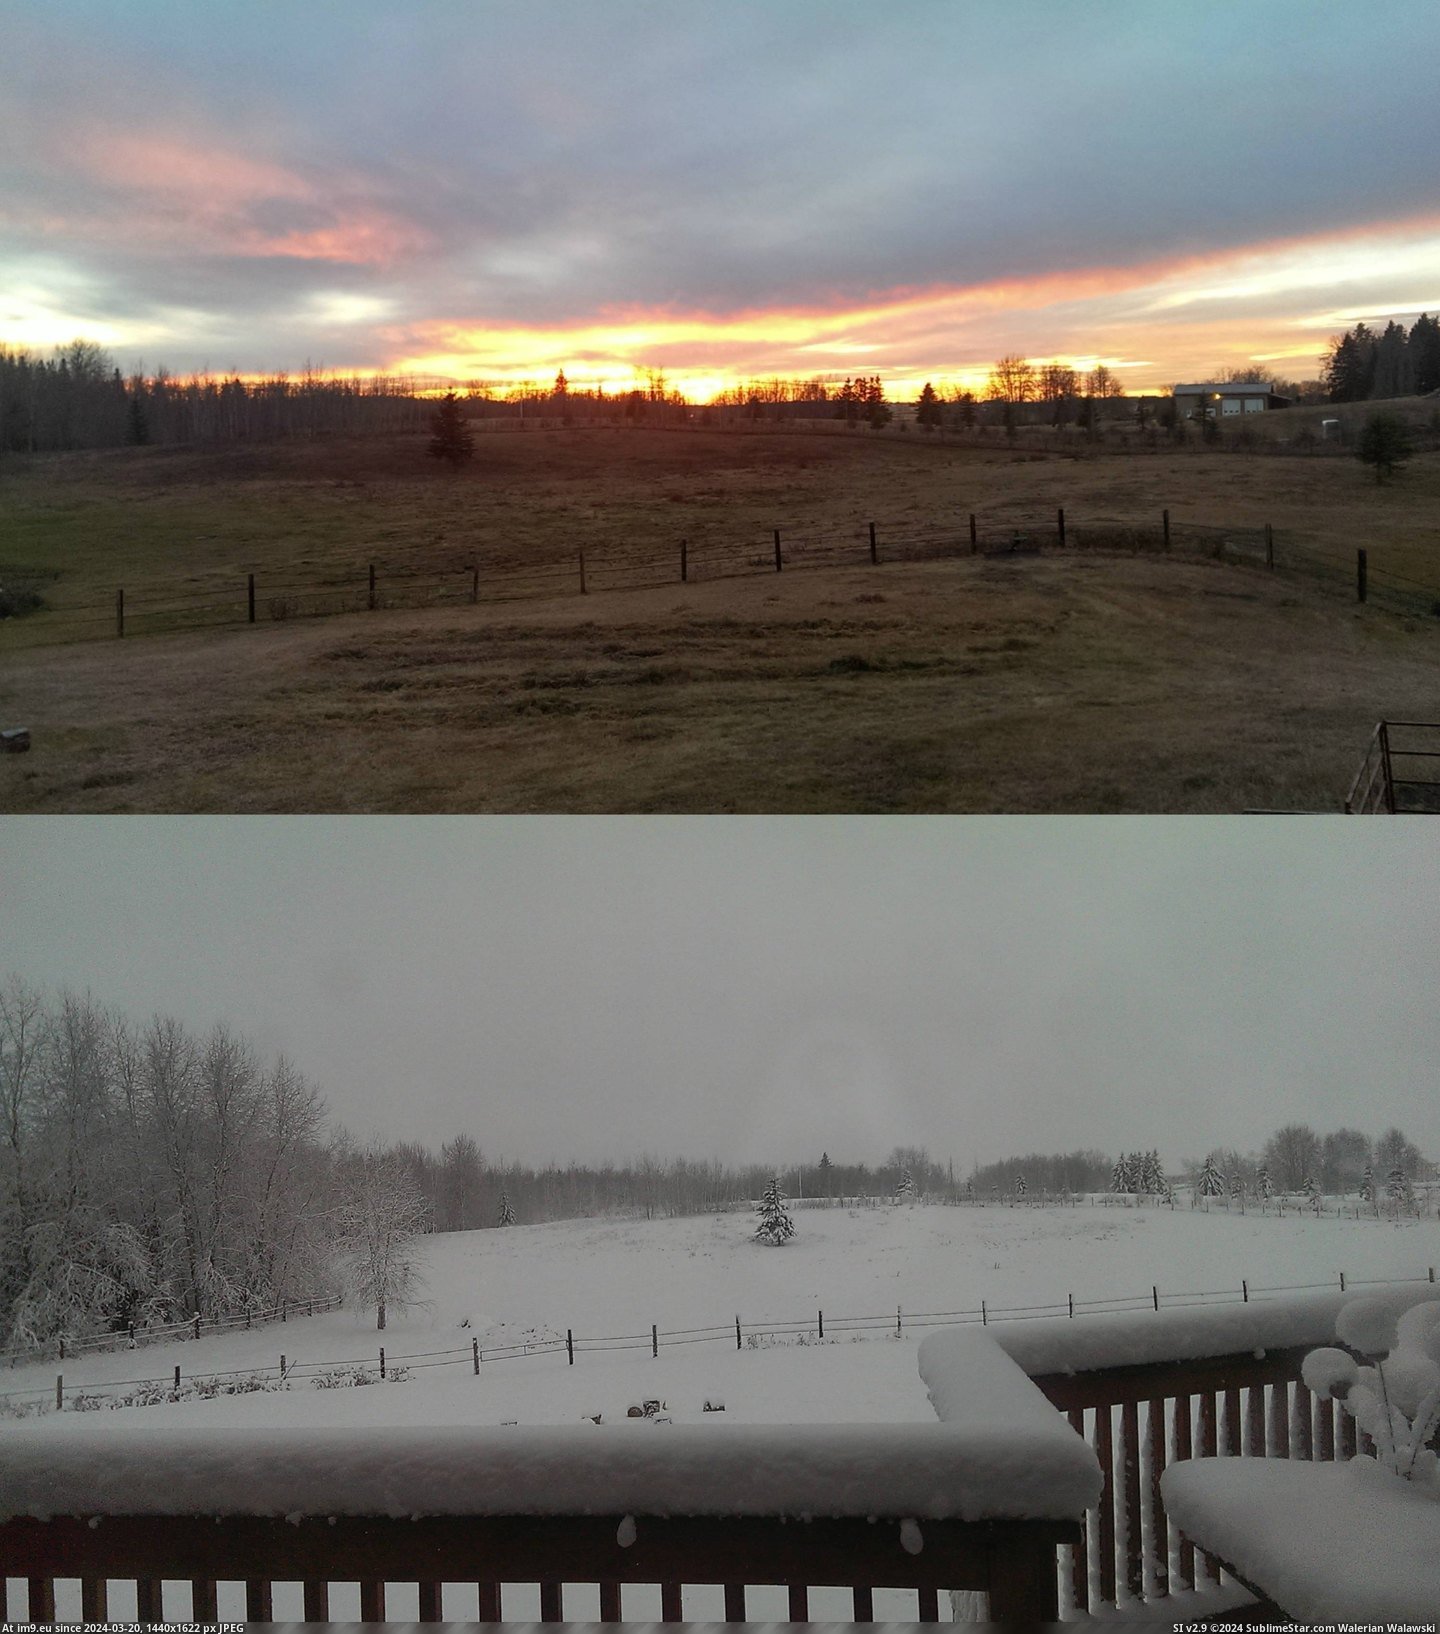 #How #Canada #Yard #Alberta #Changed #Live #Hours [Pics] I live in Alberta Canada, this is how my yard changed within 24 hours. Pic. (Bild von album My r/PICS favs))